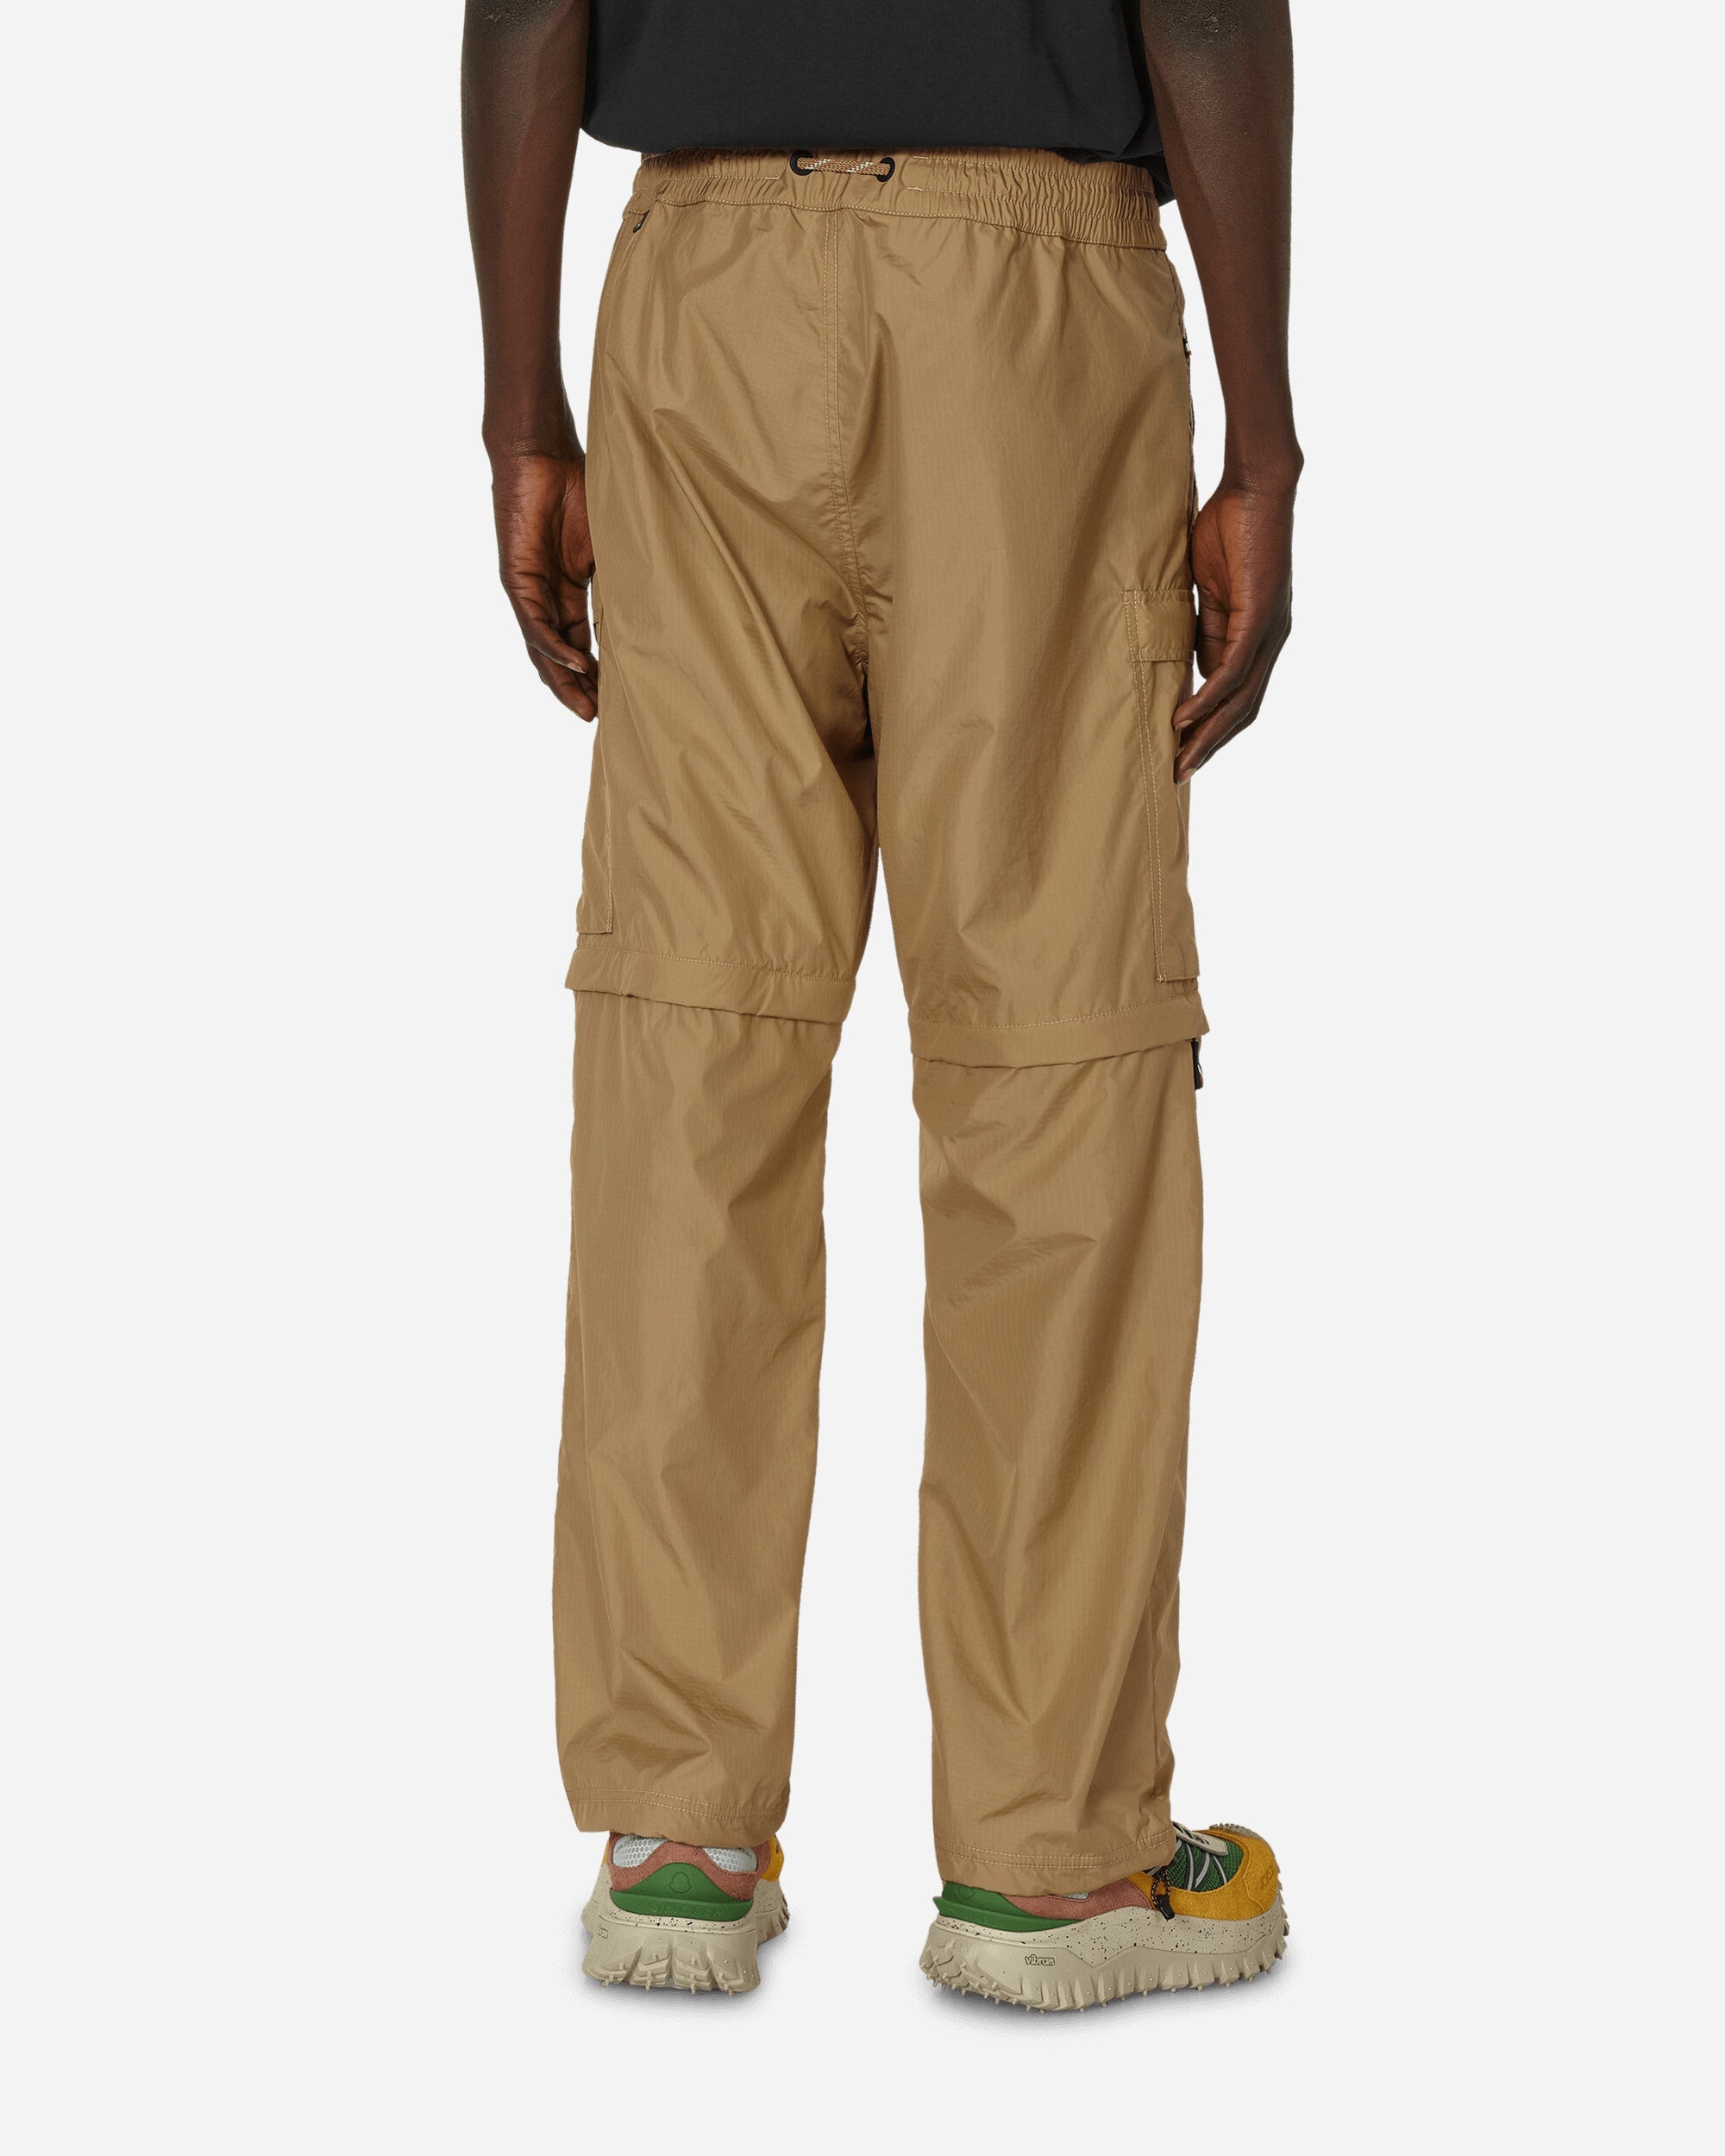 Day-Namic Convertible Cargo Pants Beige - 3